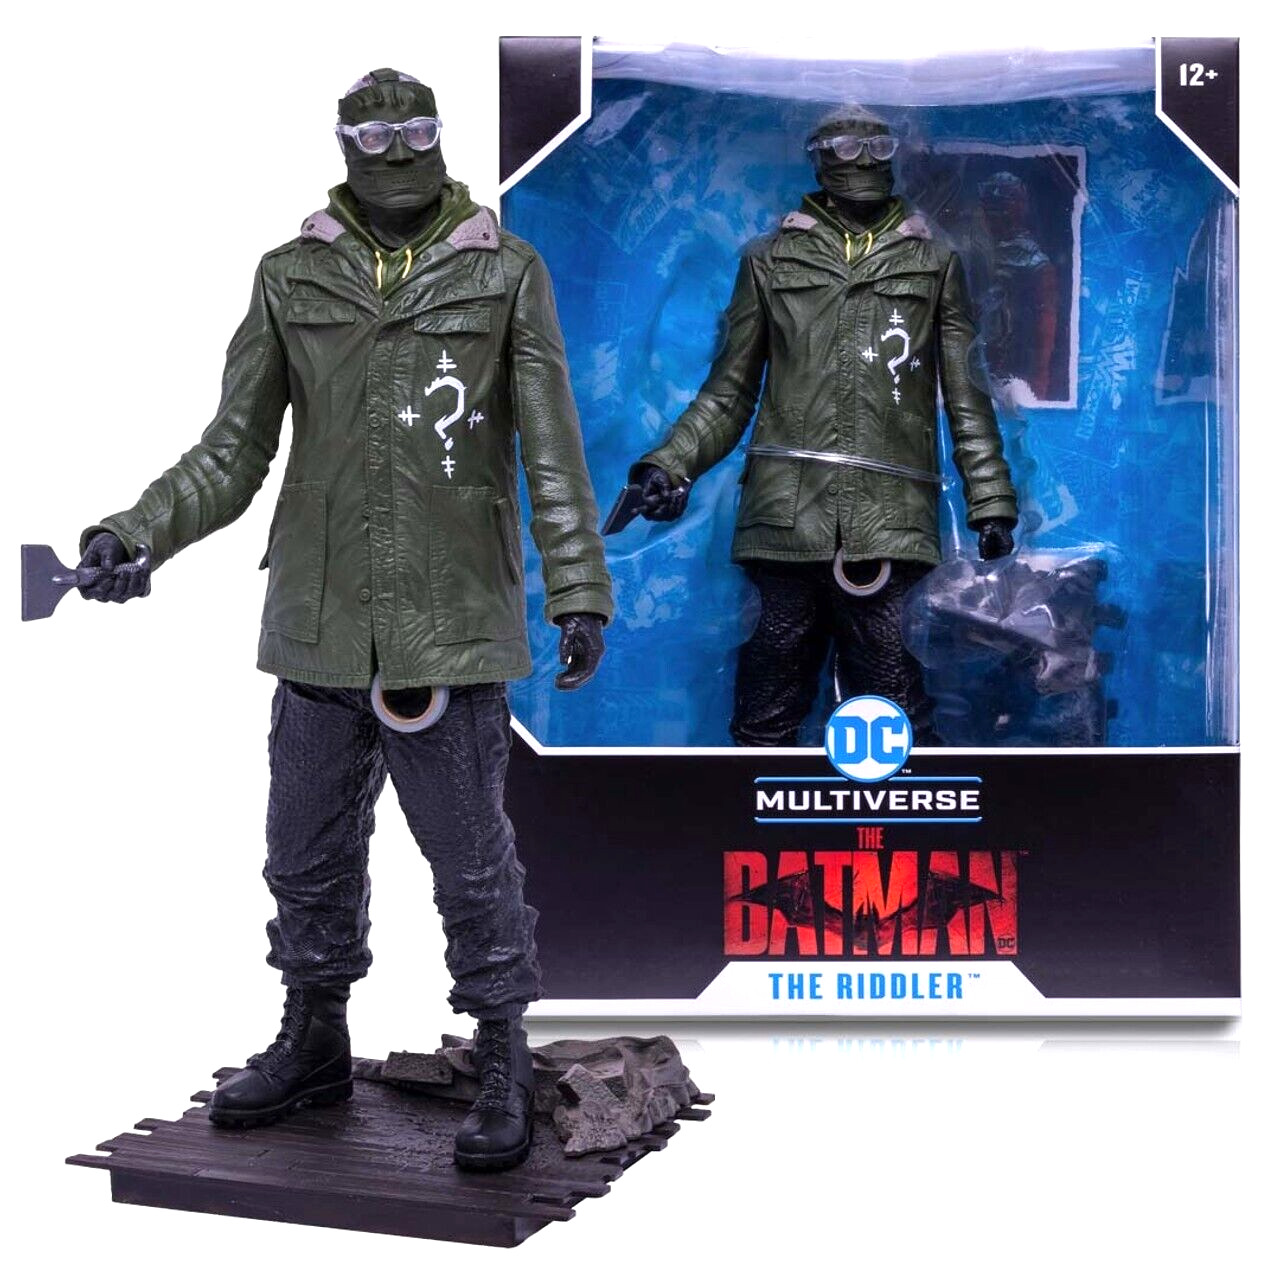 DC Multiverse 12" The Riddler Action Figure from The Batman Movie - NEW IN STOCK